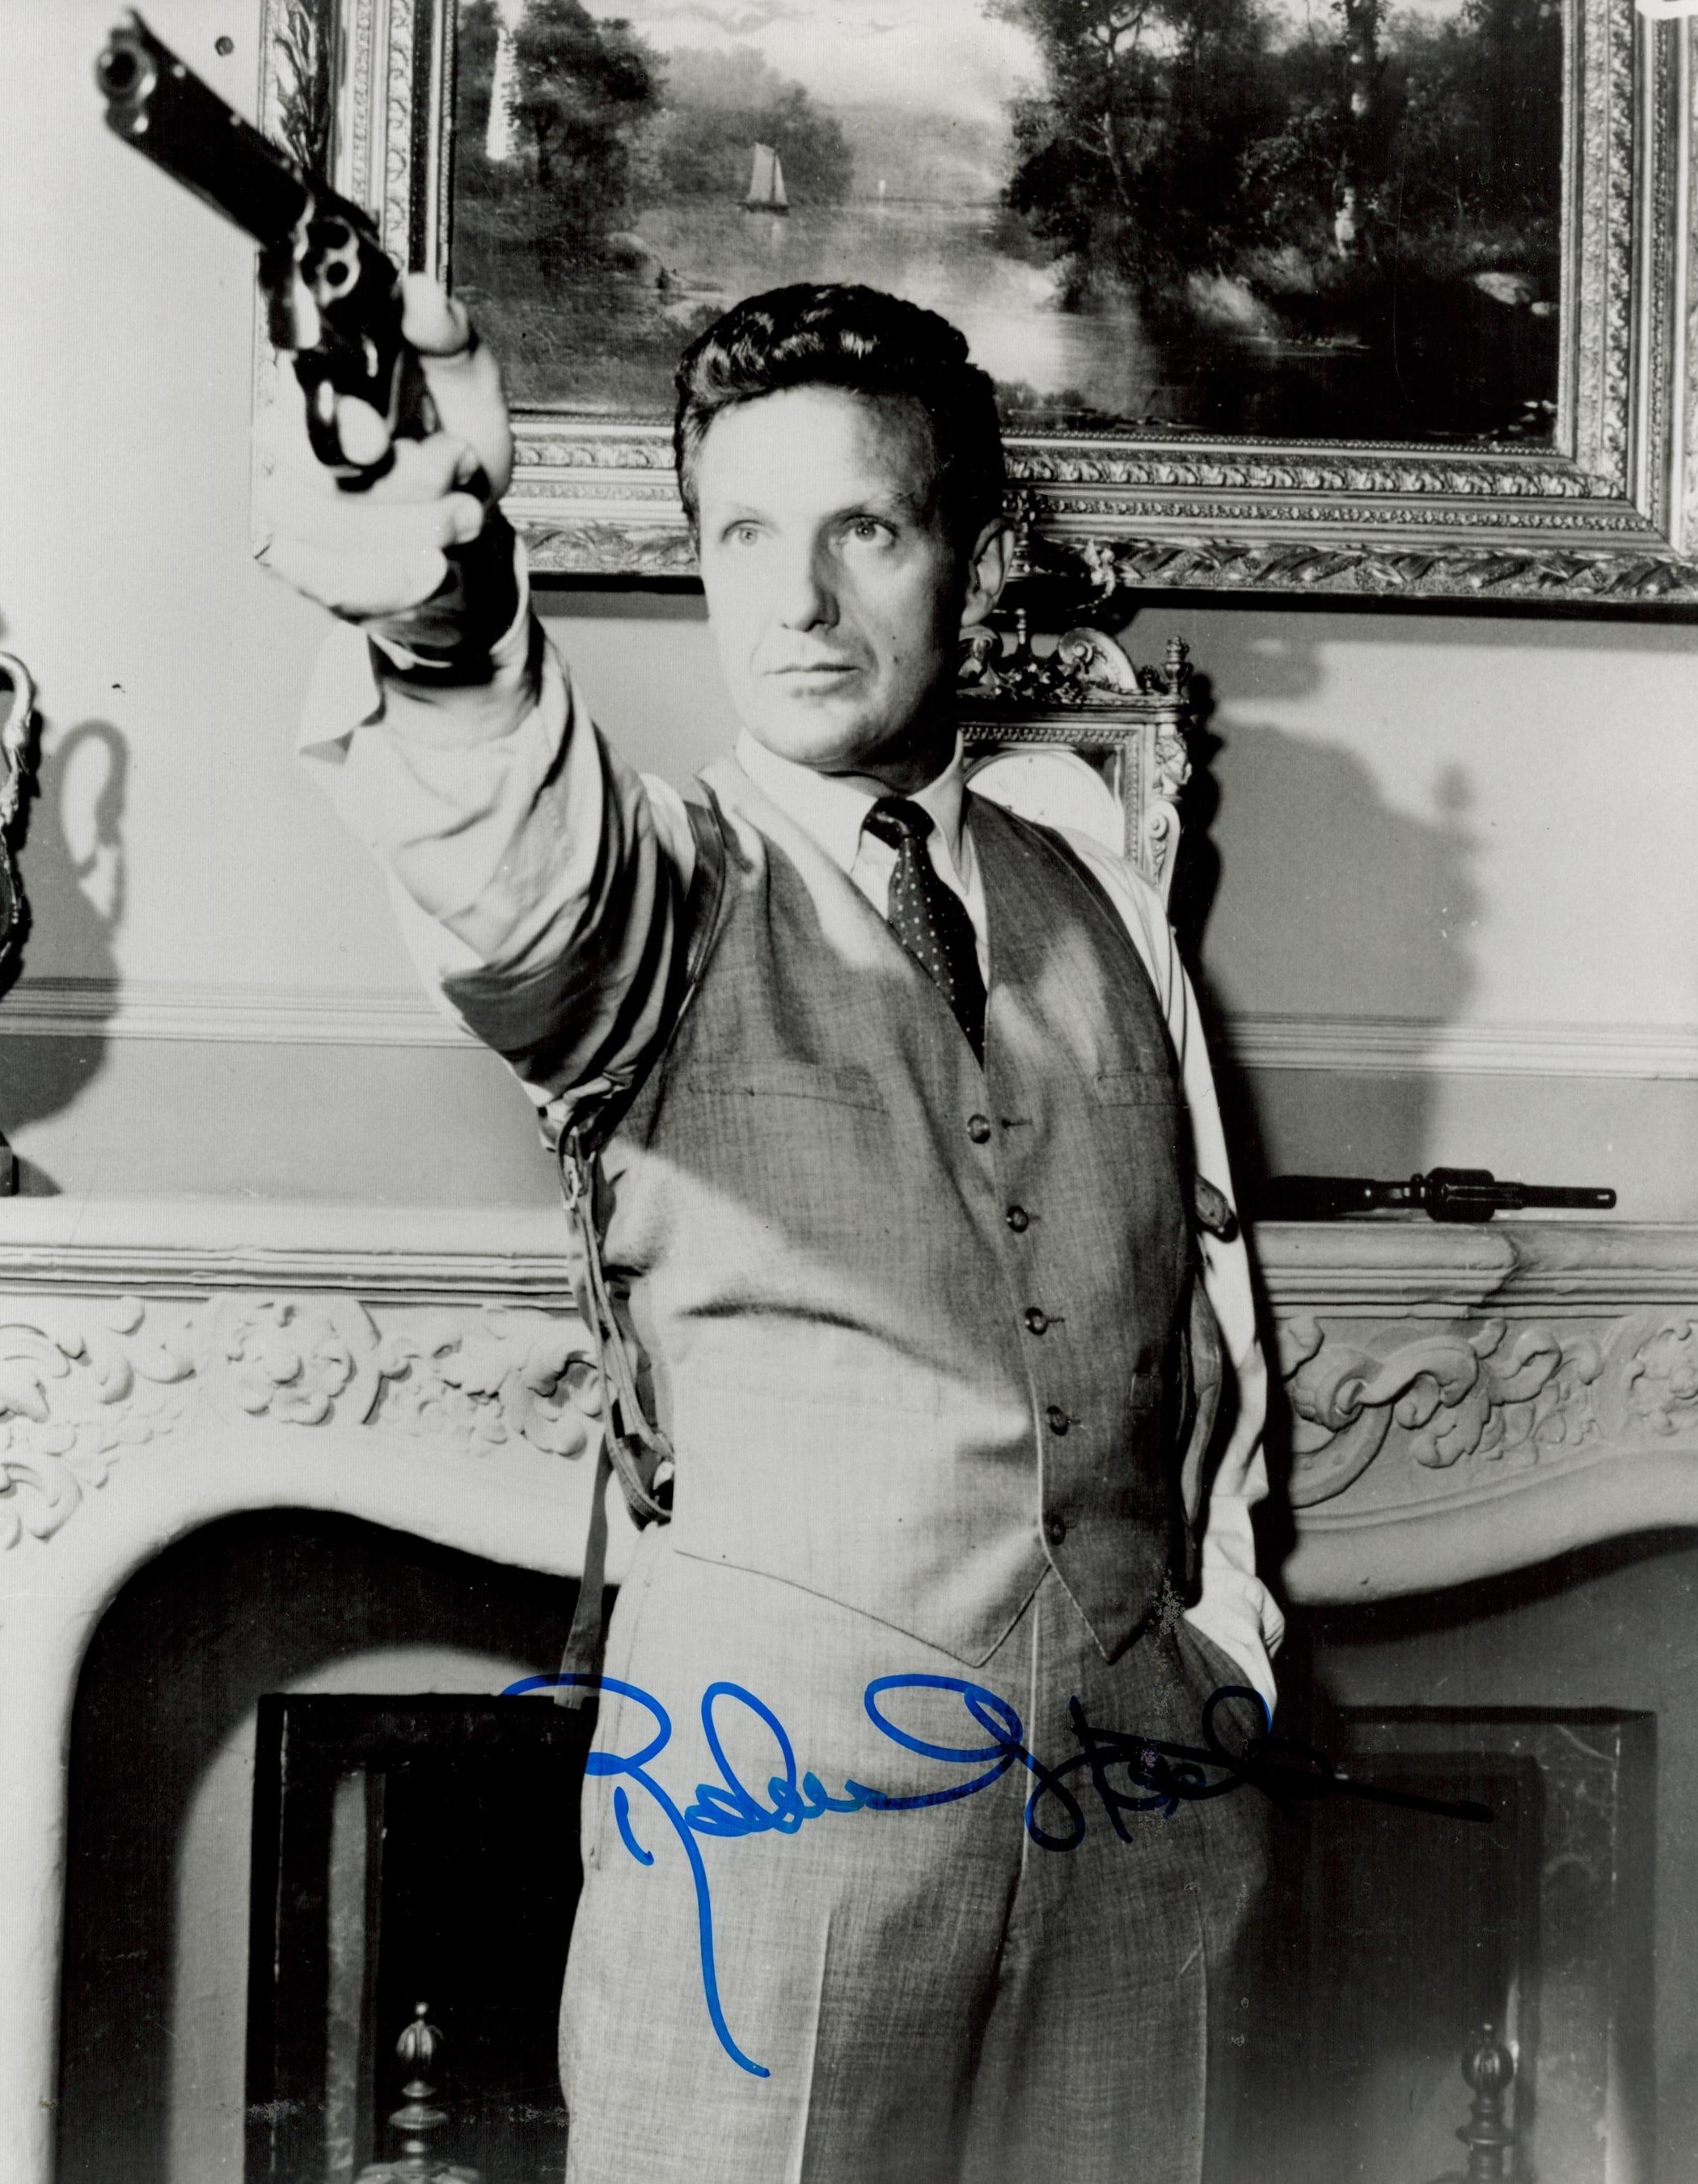 Robert Stack signed 10x8 black and white photograph in character as Eliot Ness from the TV series '